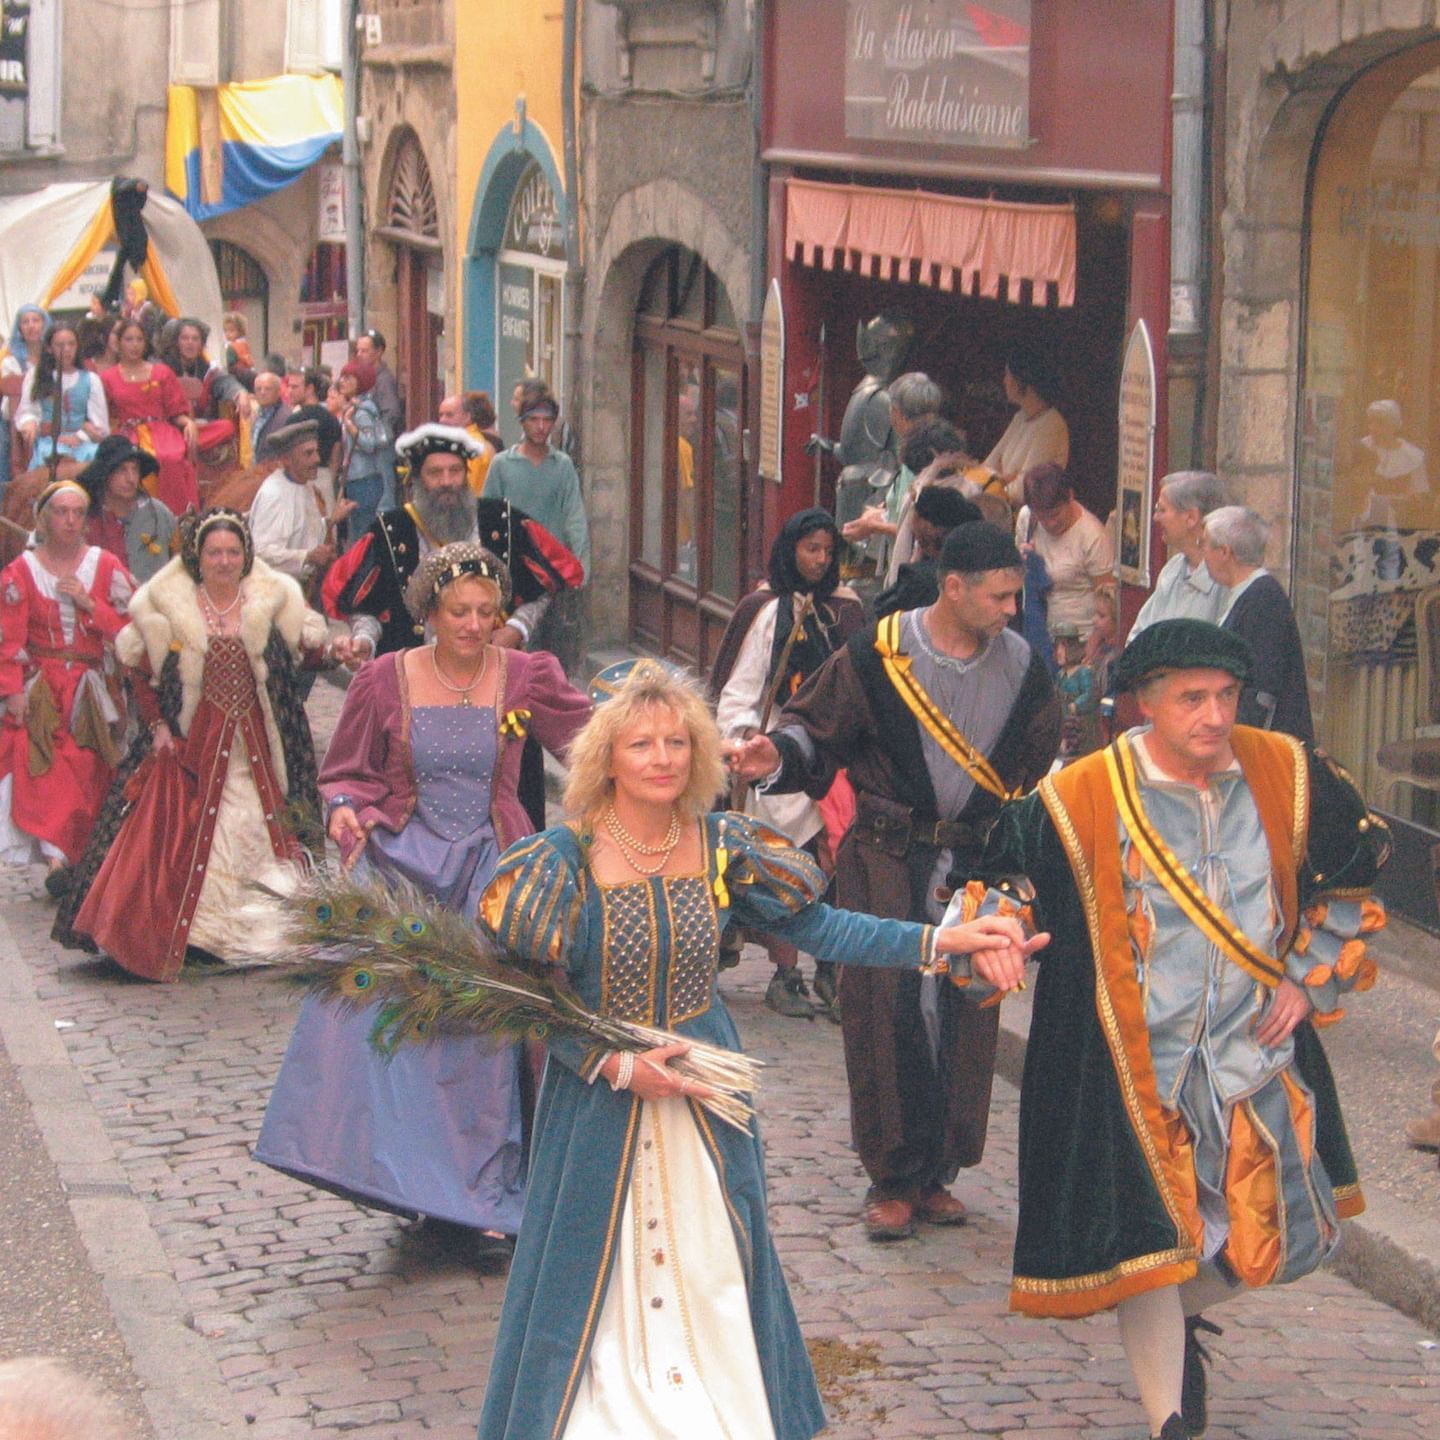 People parading at the Folklore Festival near Originals Hotels